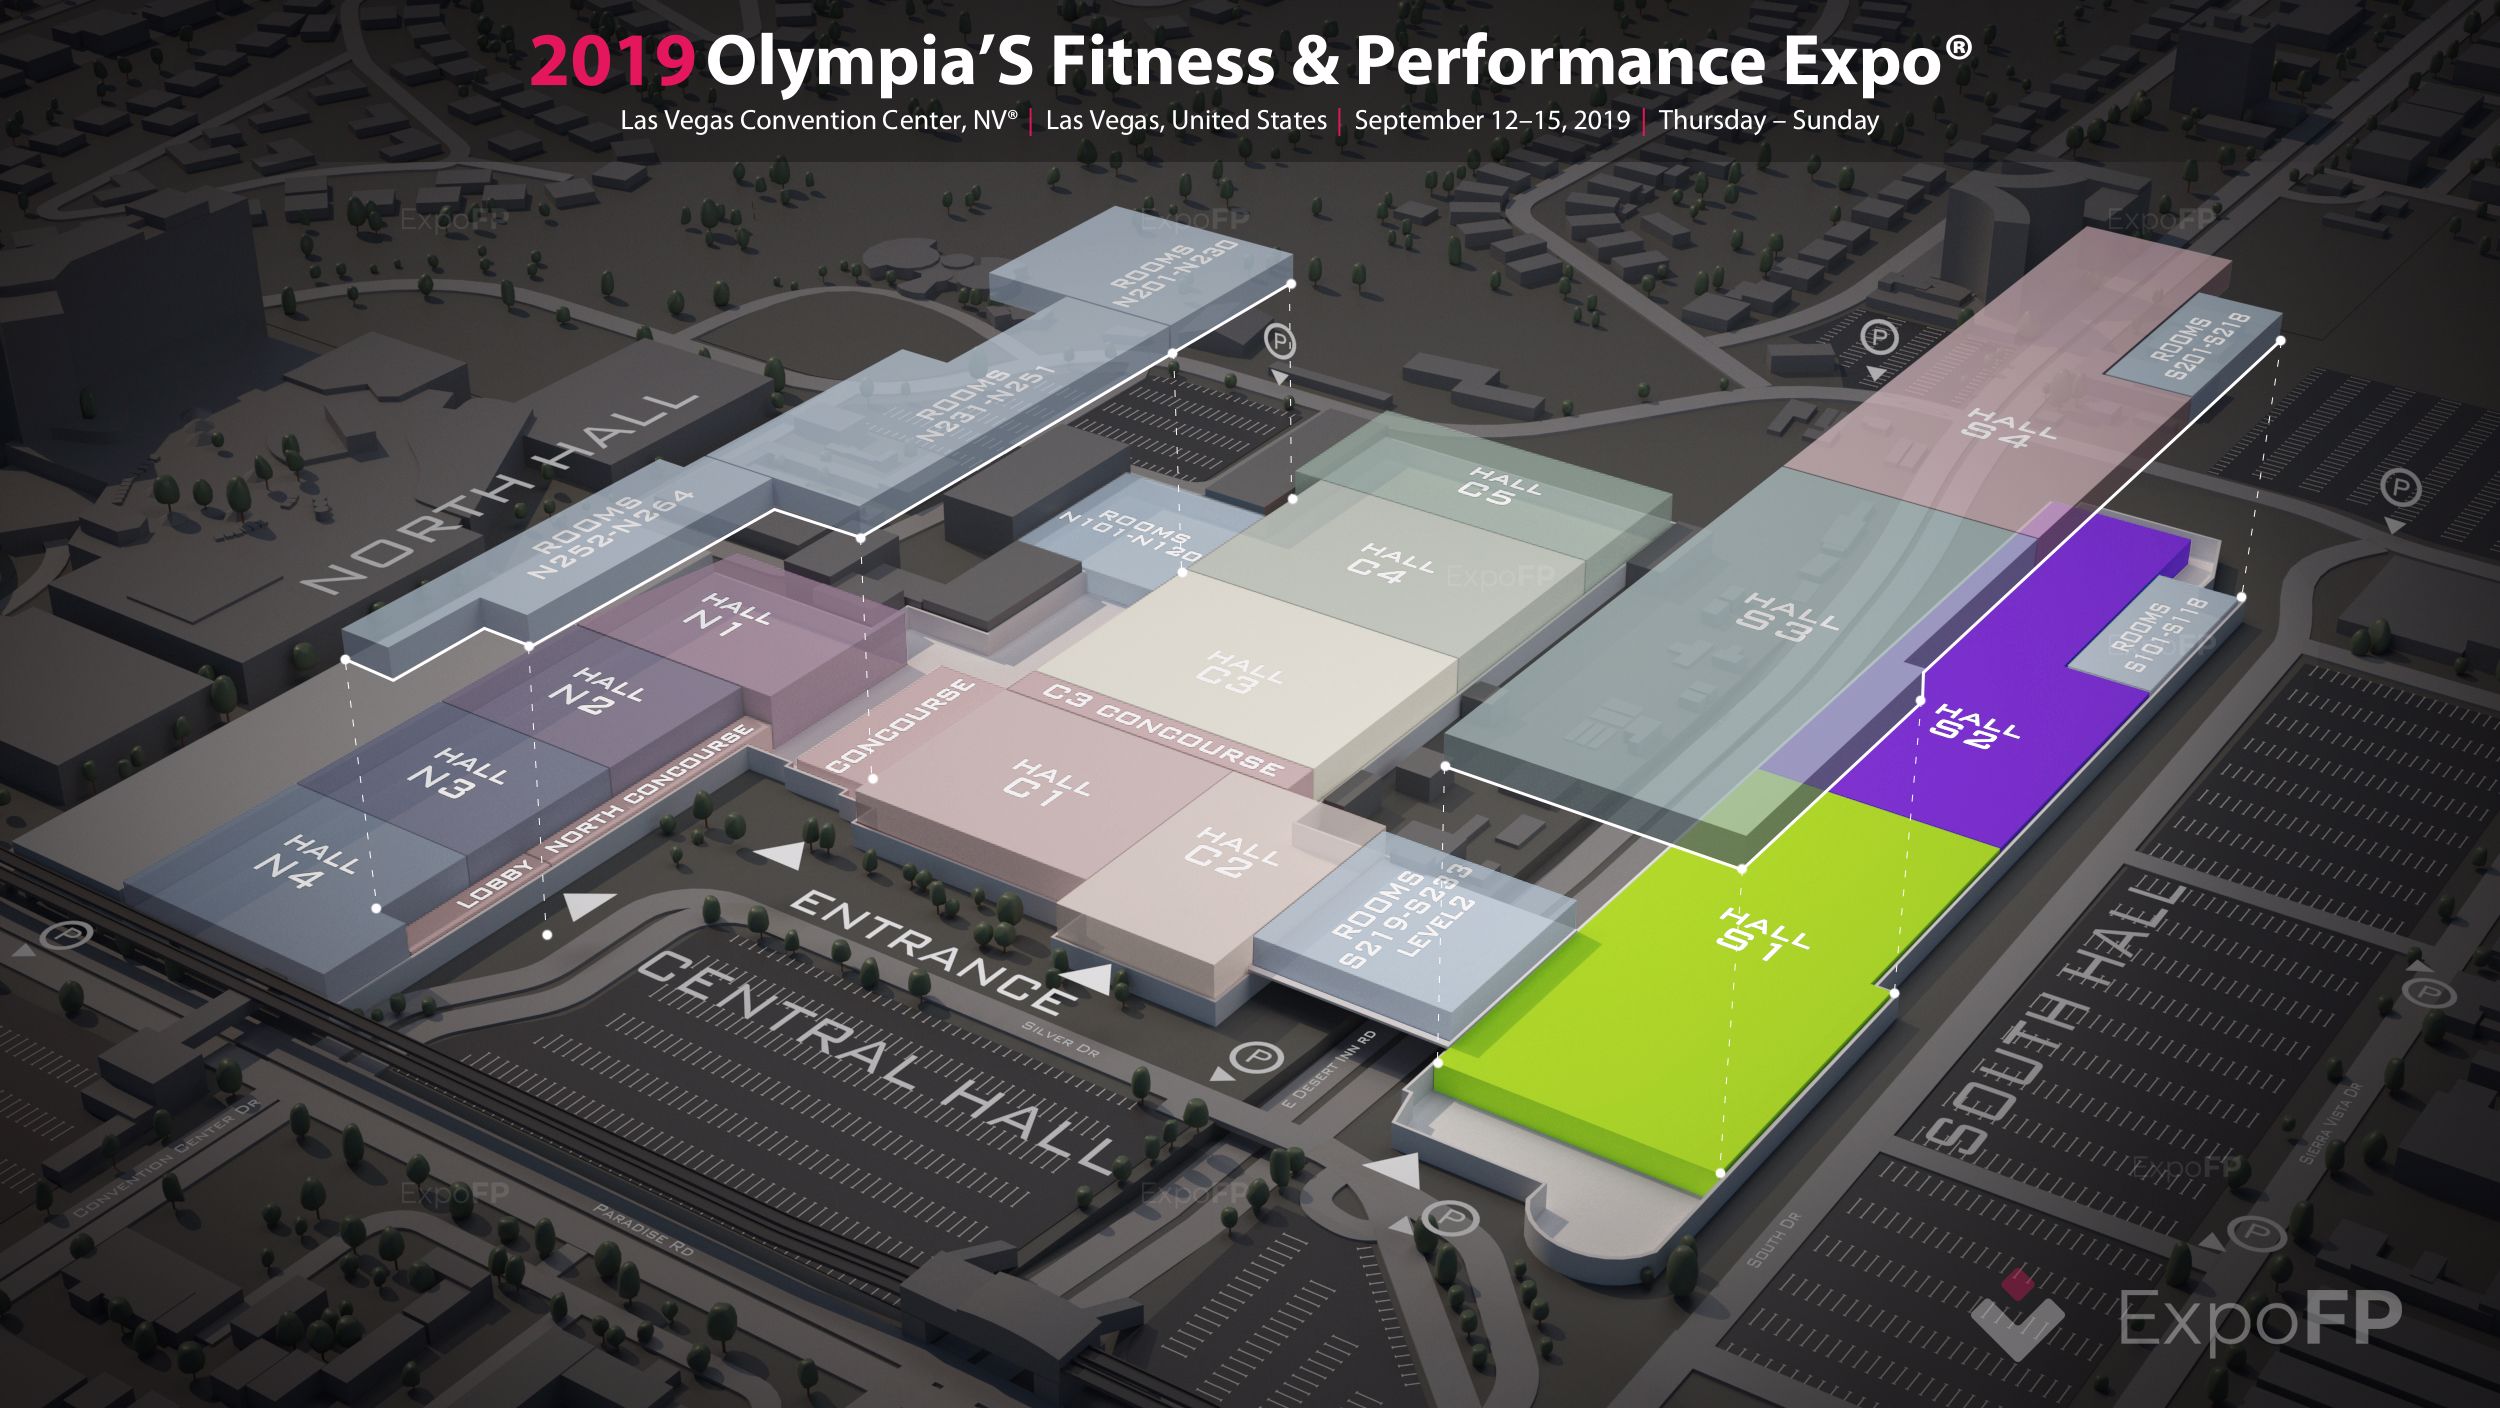 Olympia’s Fitness & Performance Expo 2019 in Las Vegas